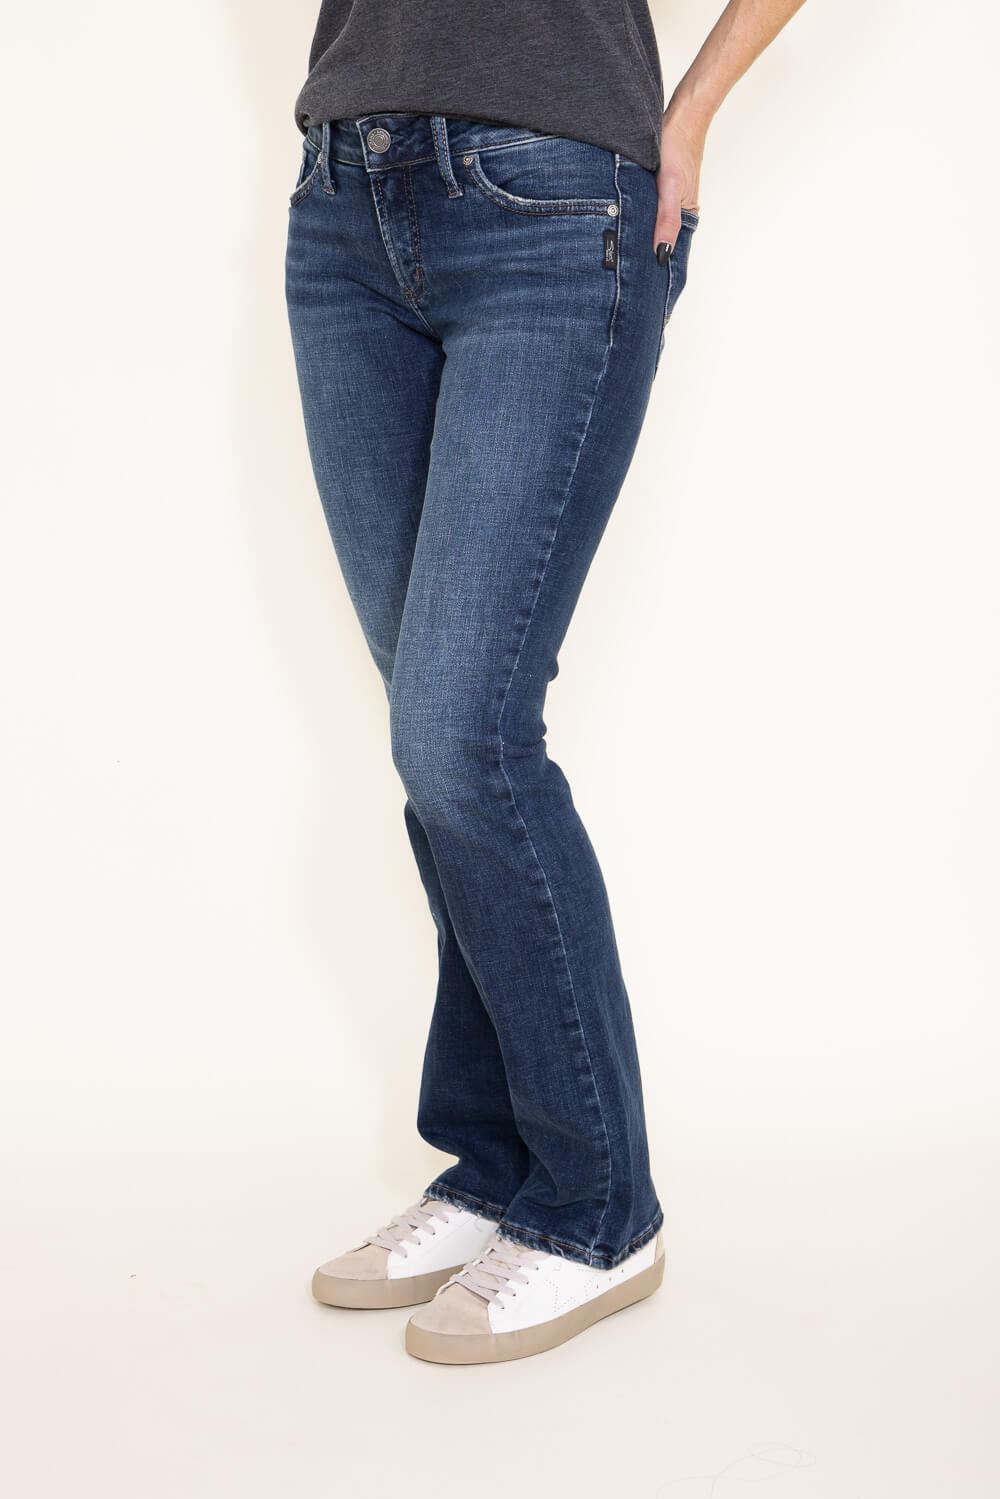 Women's Recover High Rise Bootcut Blue Jeans | Lands' End